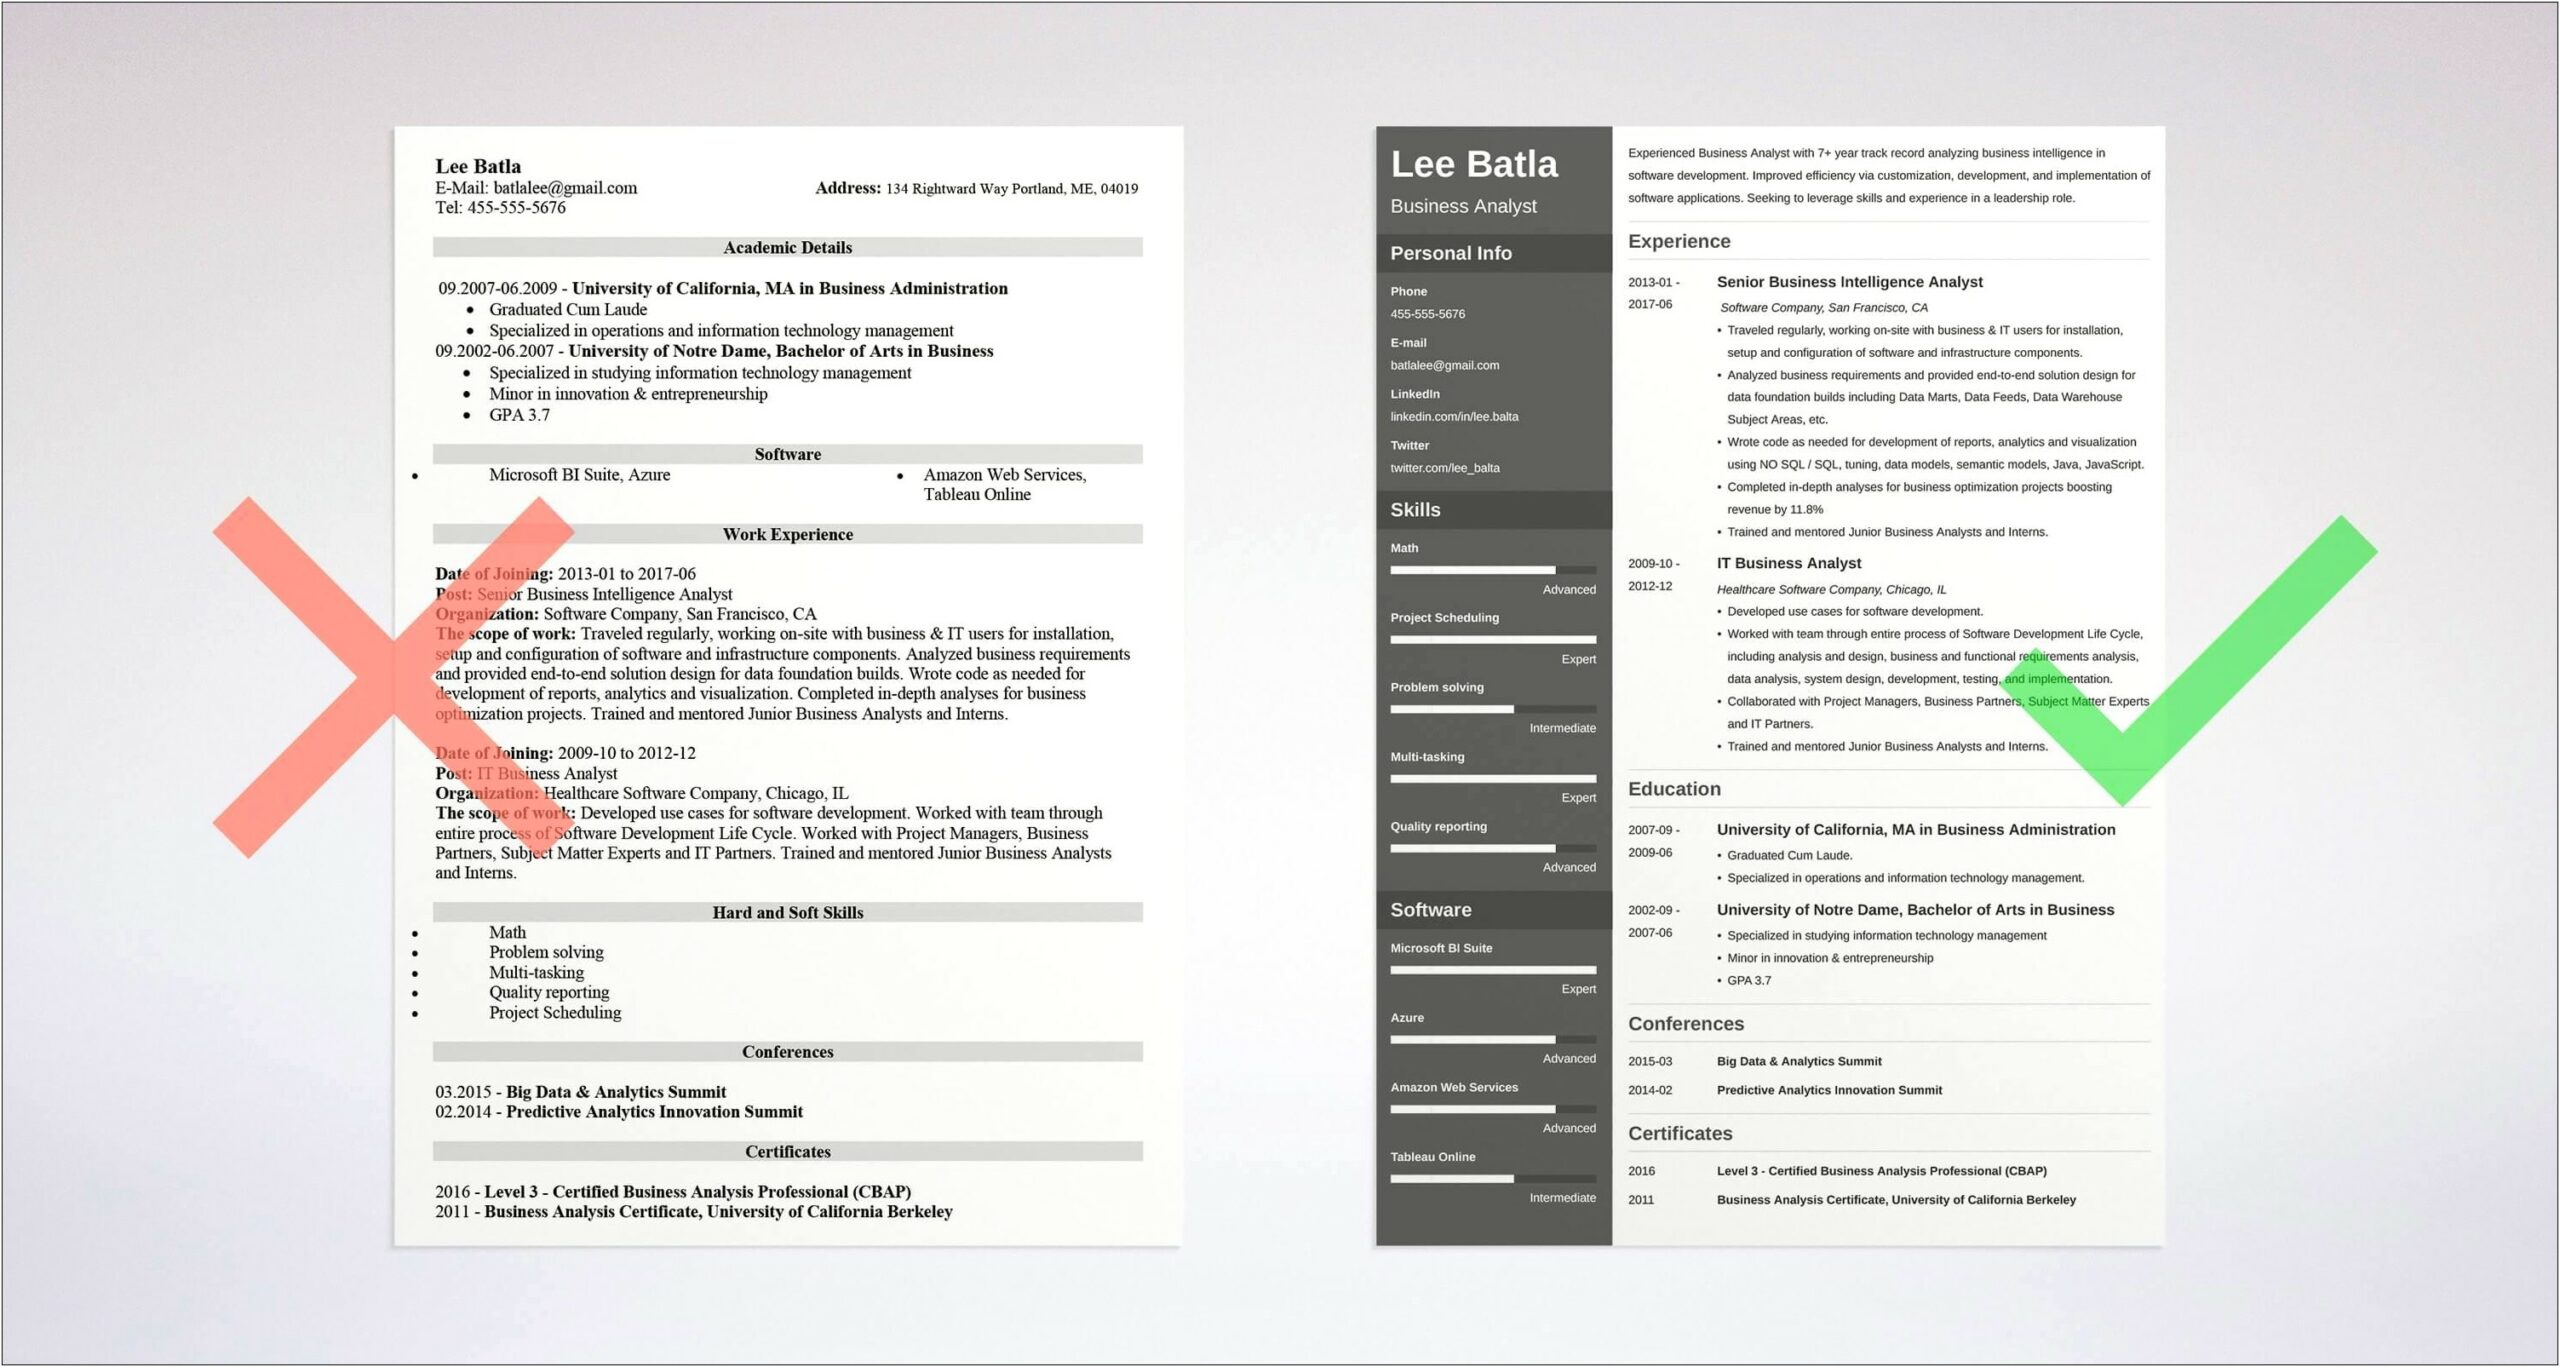 Business Analyst Resume Sample Download